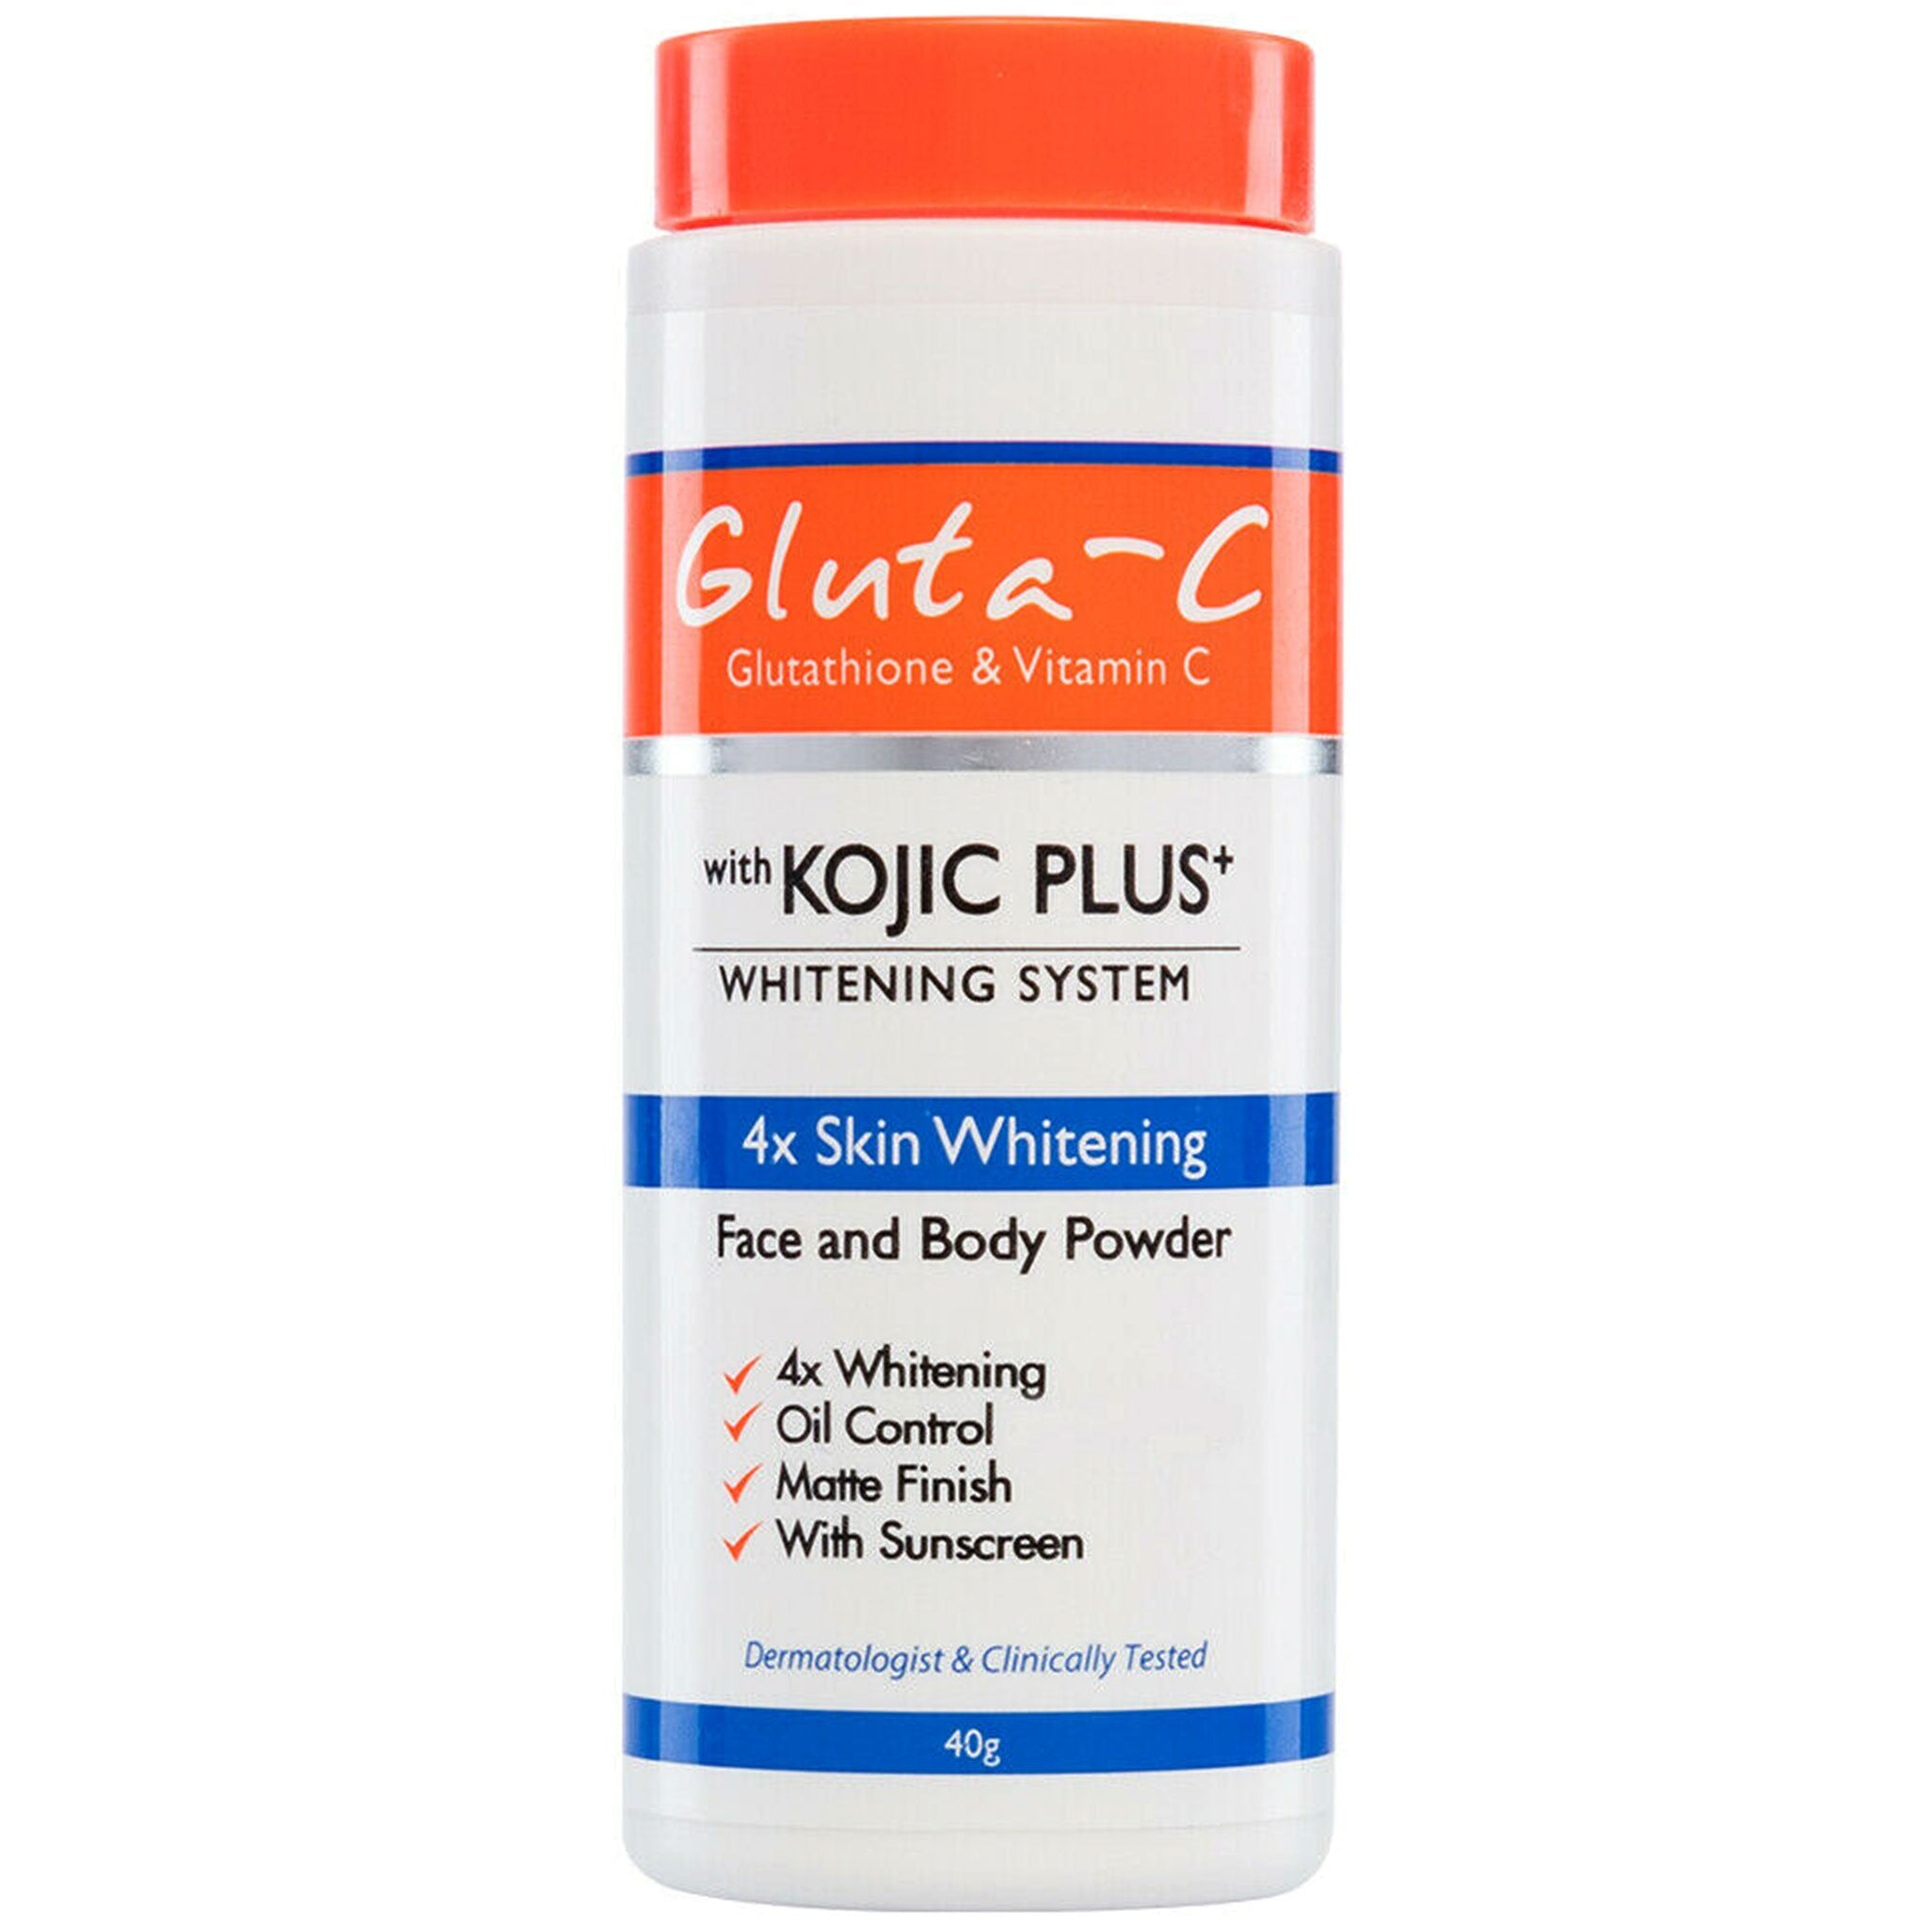 GlutaC Face and body Powder with Kojic Plus Whitening System 40g